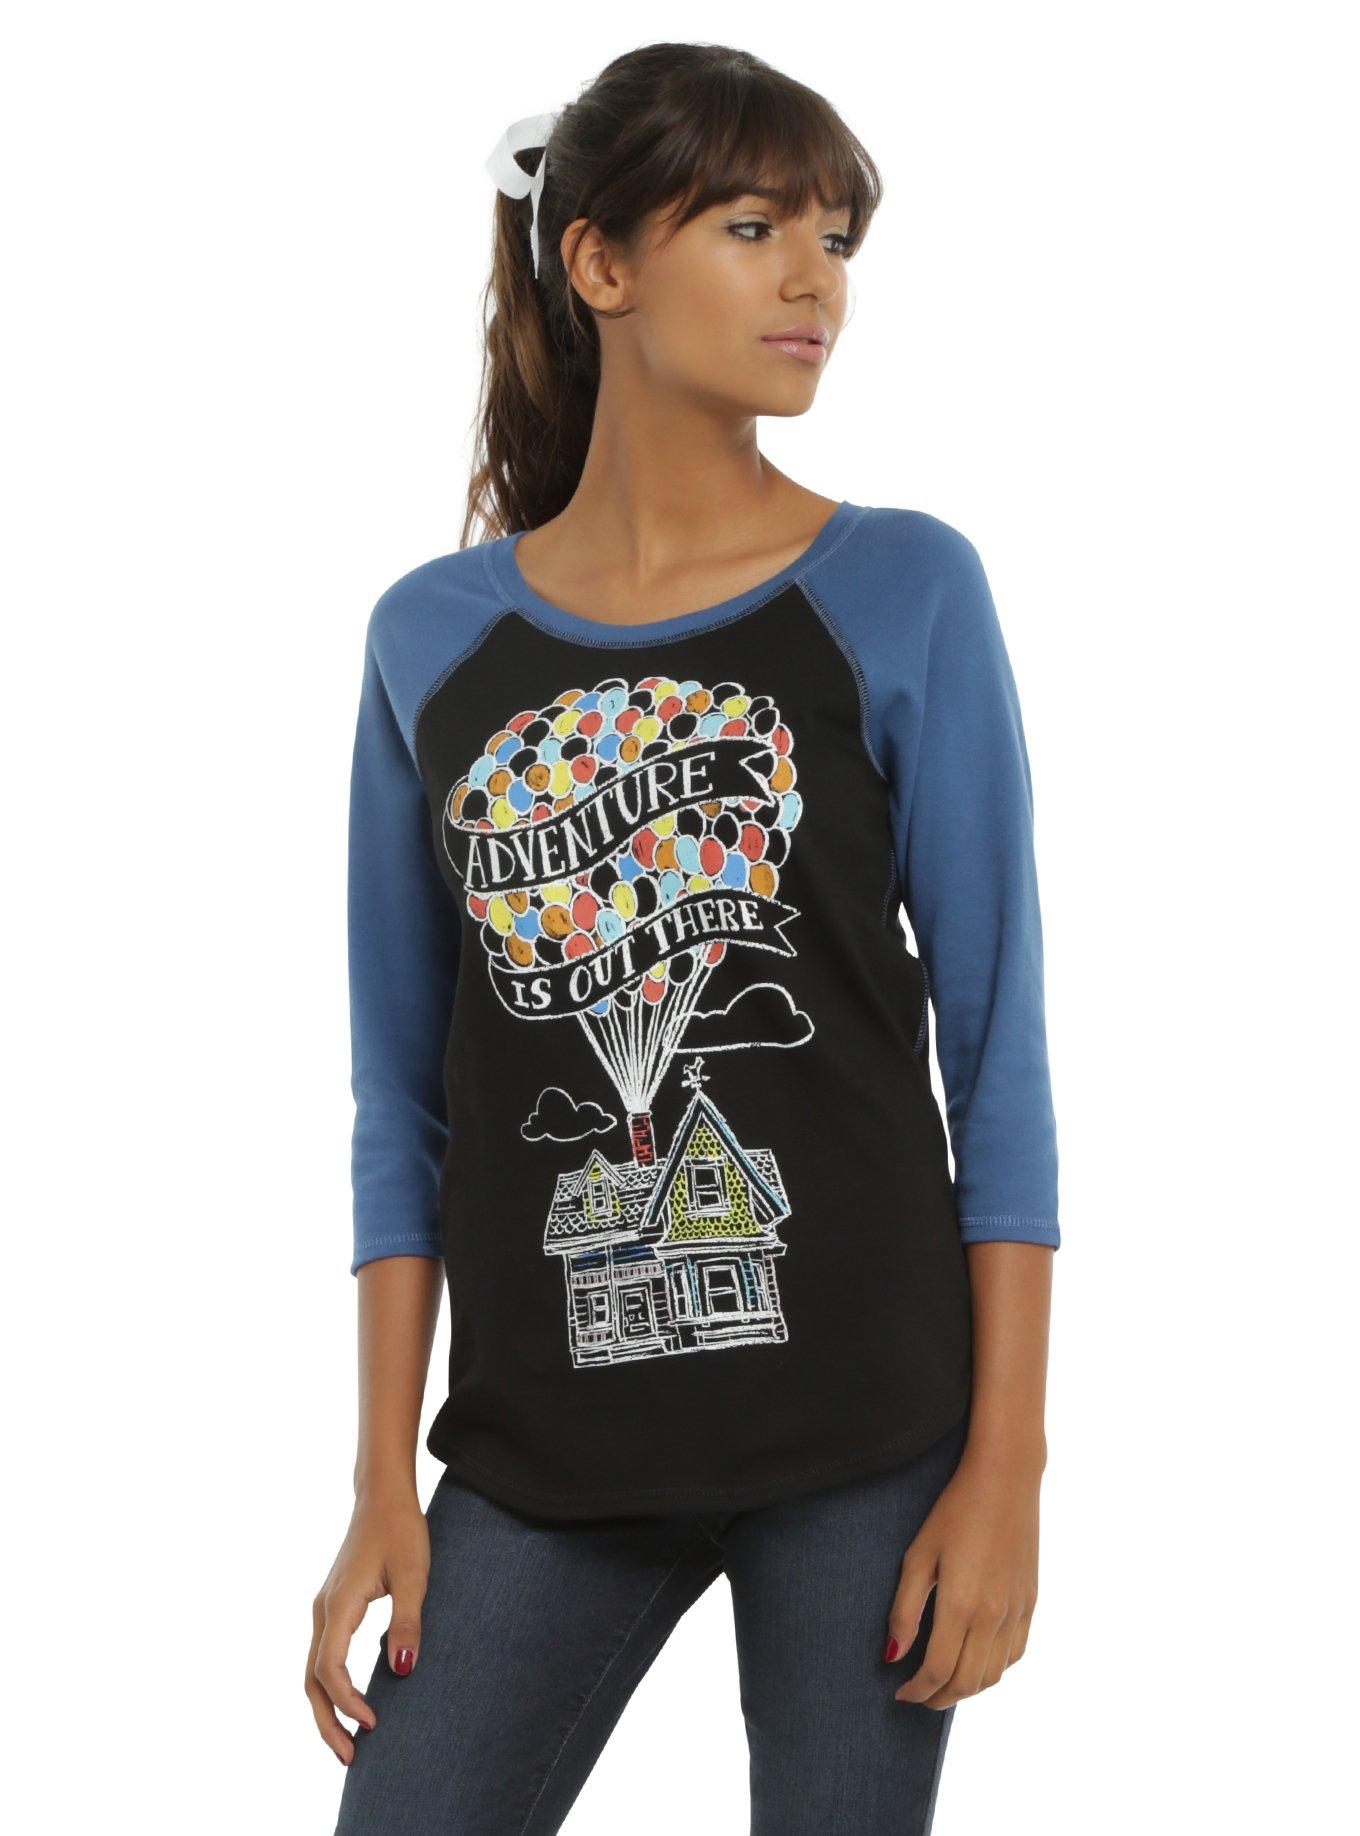 Disney Up Adventure Is Out There Girls Reversible Raglan, BLACK, hi-res